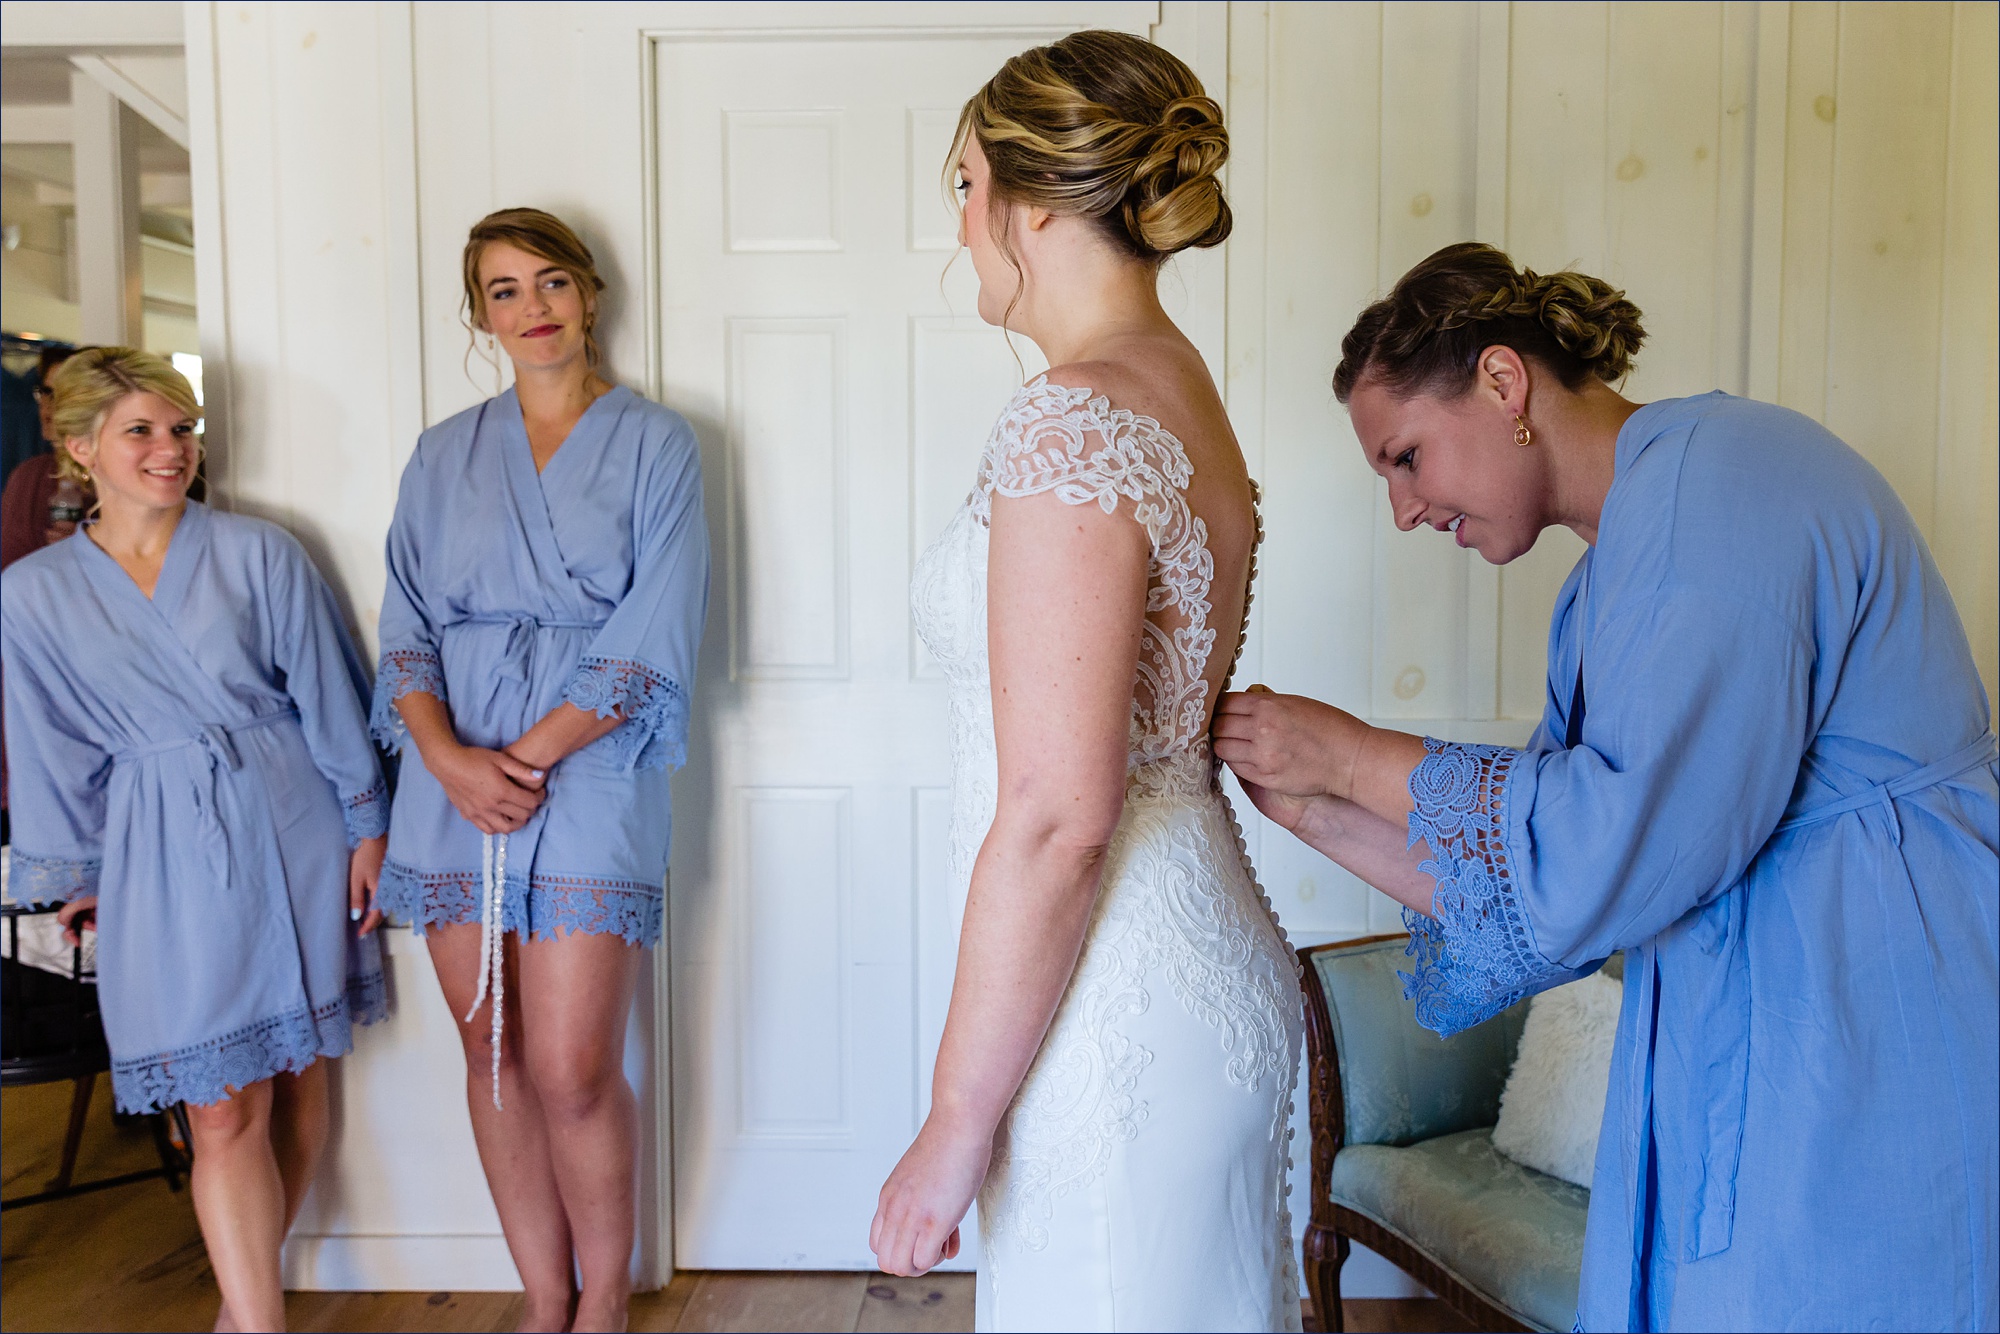 The bridesmaids watch as the bride gets into her wedding gown at The Preserve at Chocorua NH